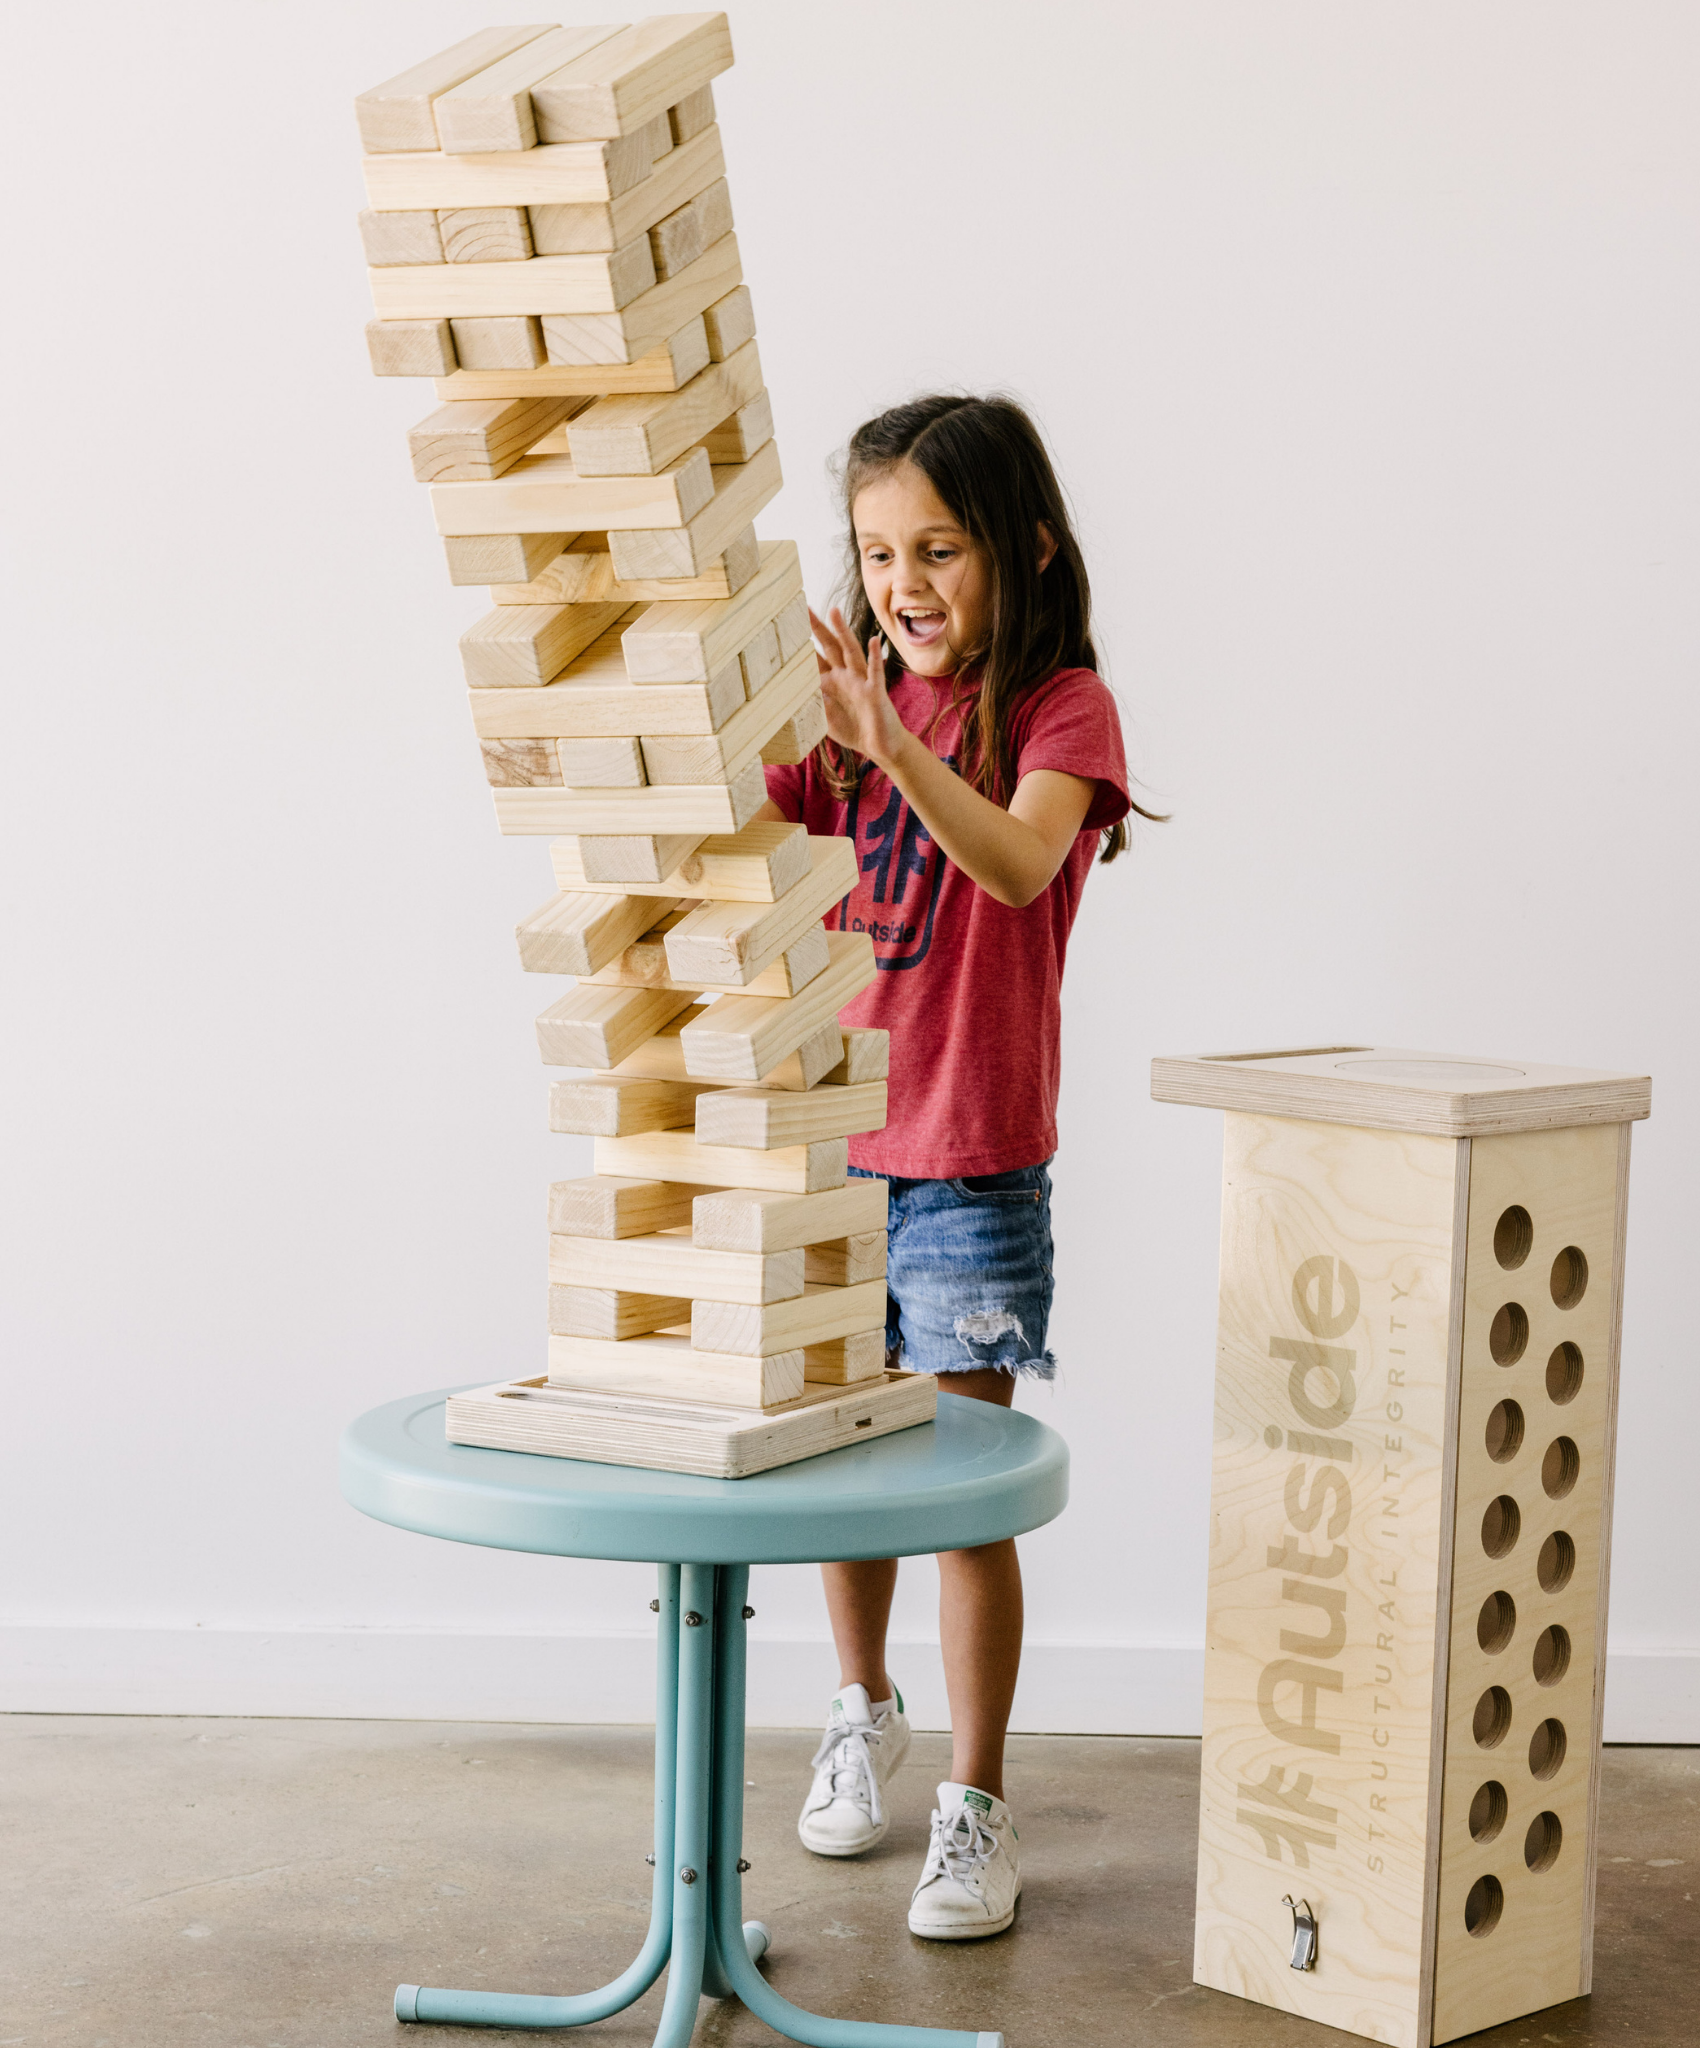 Structural Integrity - Innovating the Classic Block Stacking Game